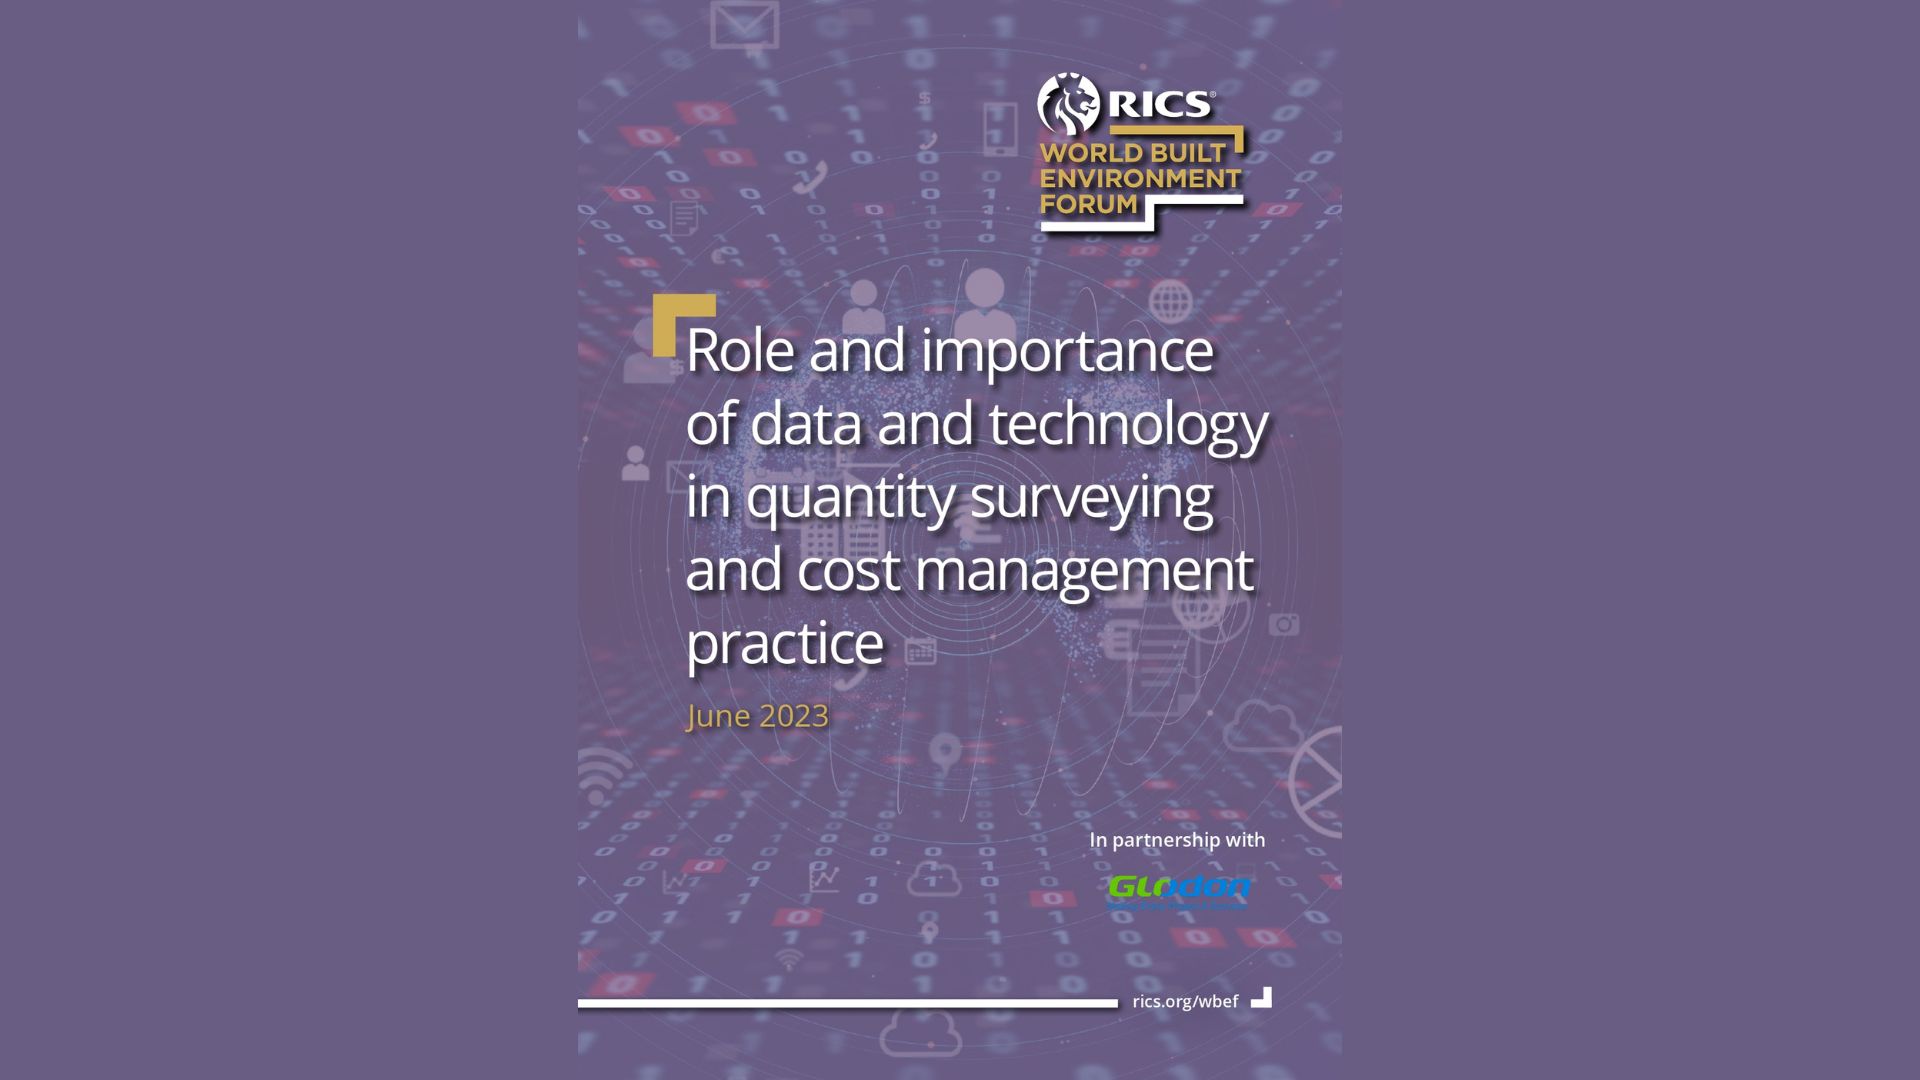 The Power of Data and Technology for Quantity Surveyors and Cost Managers